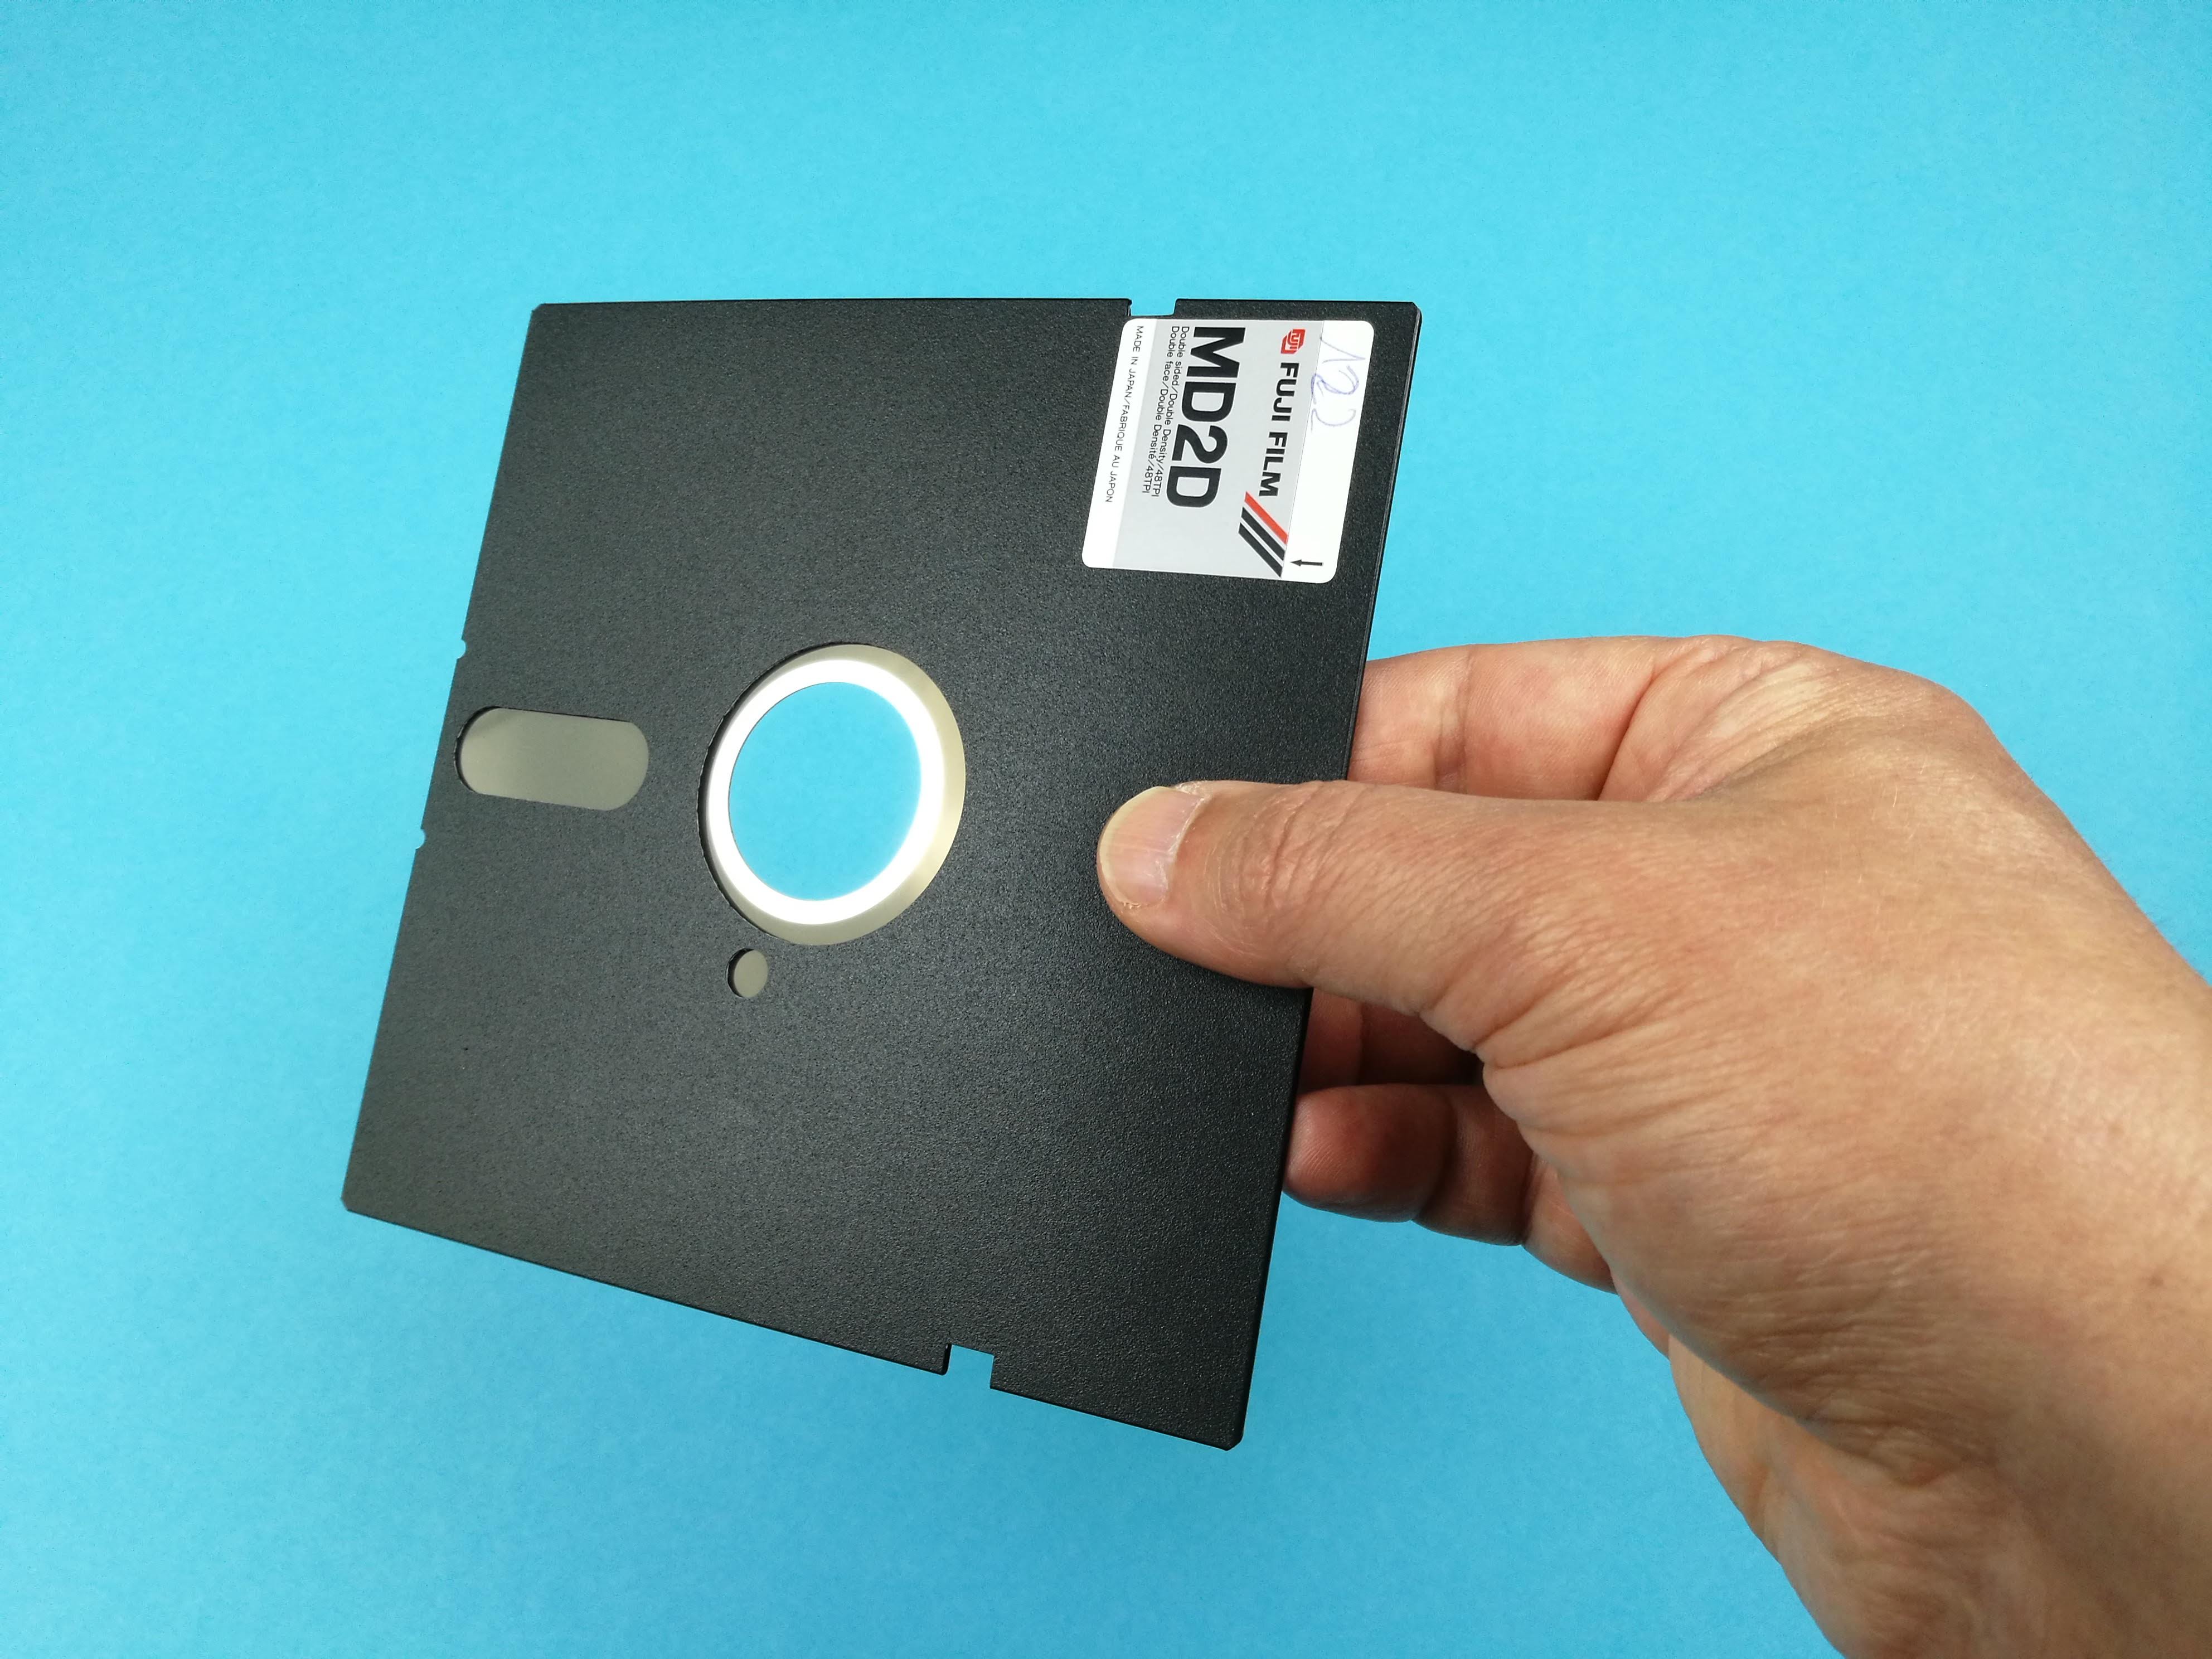 Floppy Disk 5 1 4 The special treat of 5¼-inch floppy disks – Microzeit Publishing